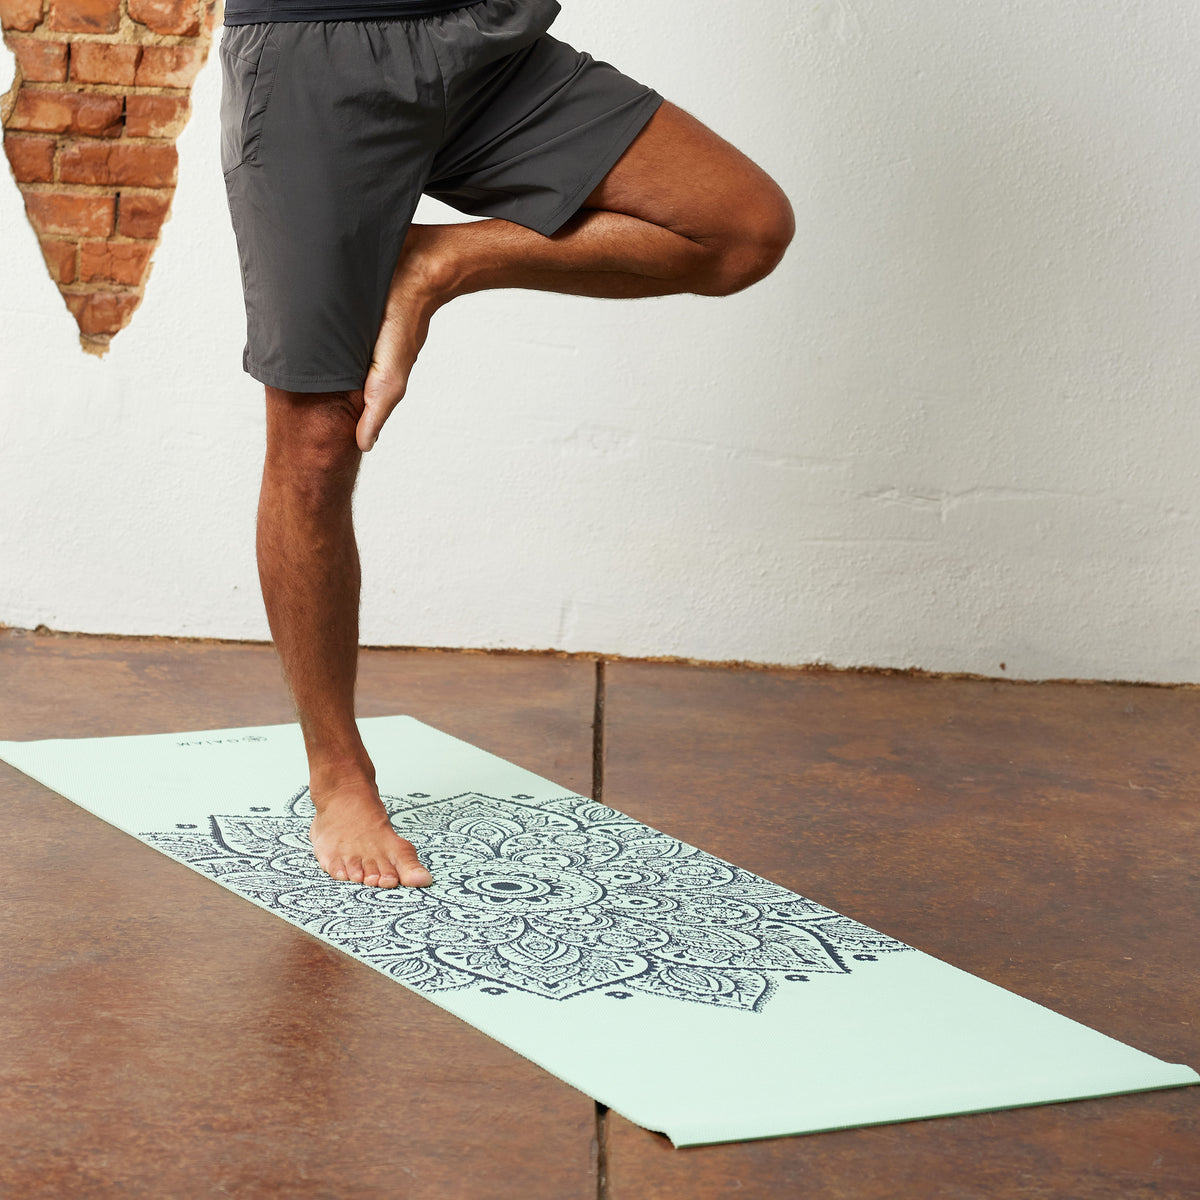 Liforme Mat Buyer's Guide: Find the Right Yoga Mat